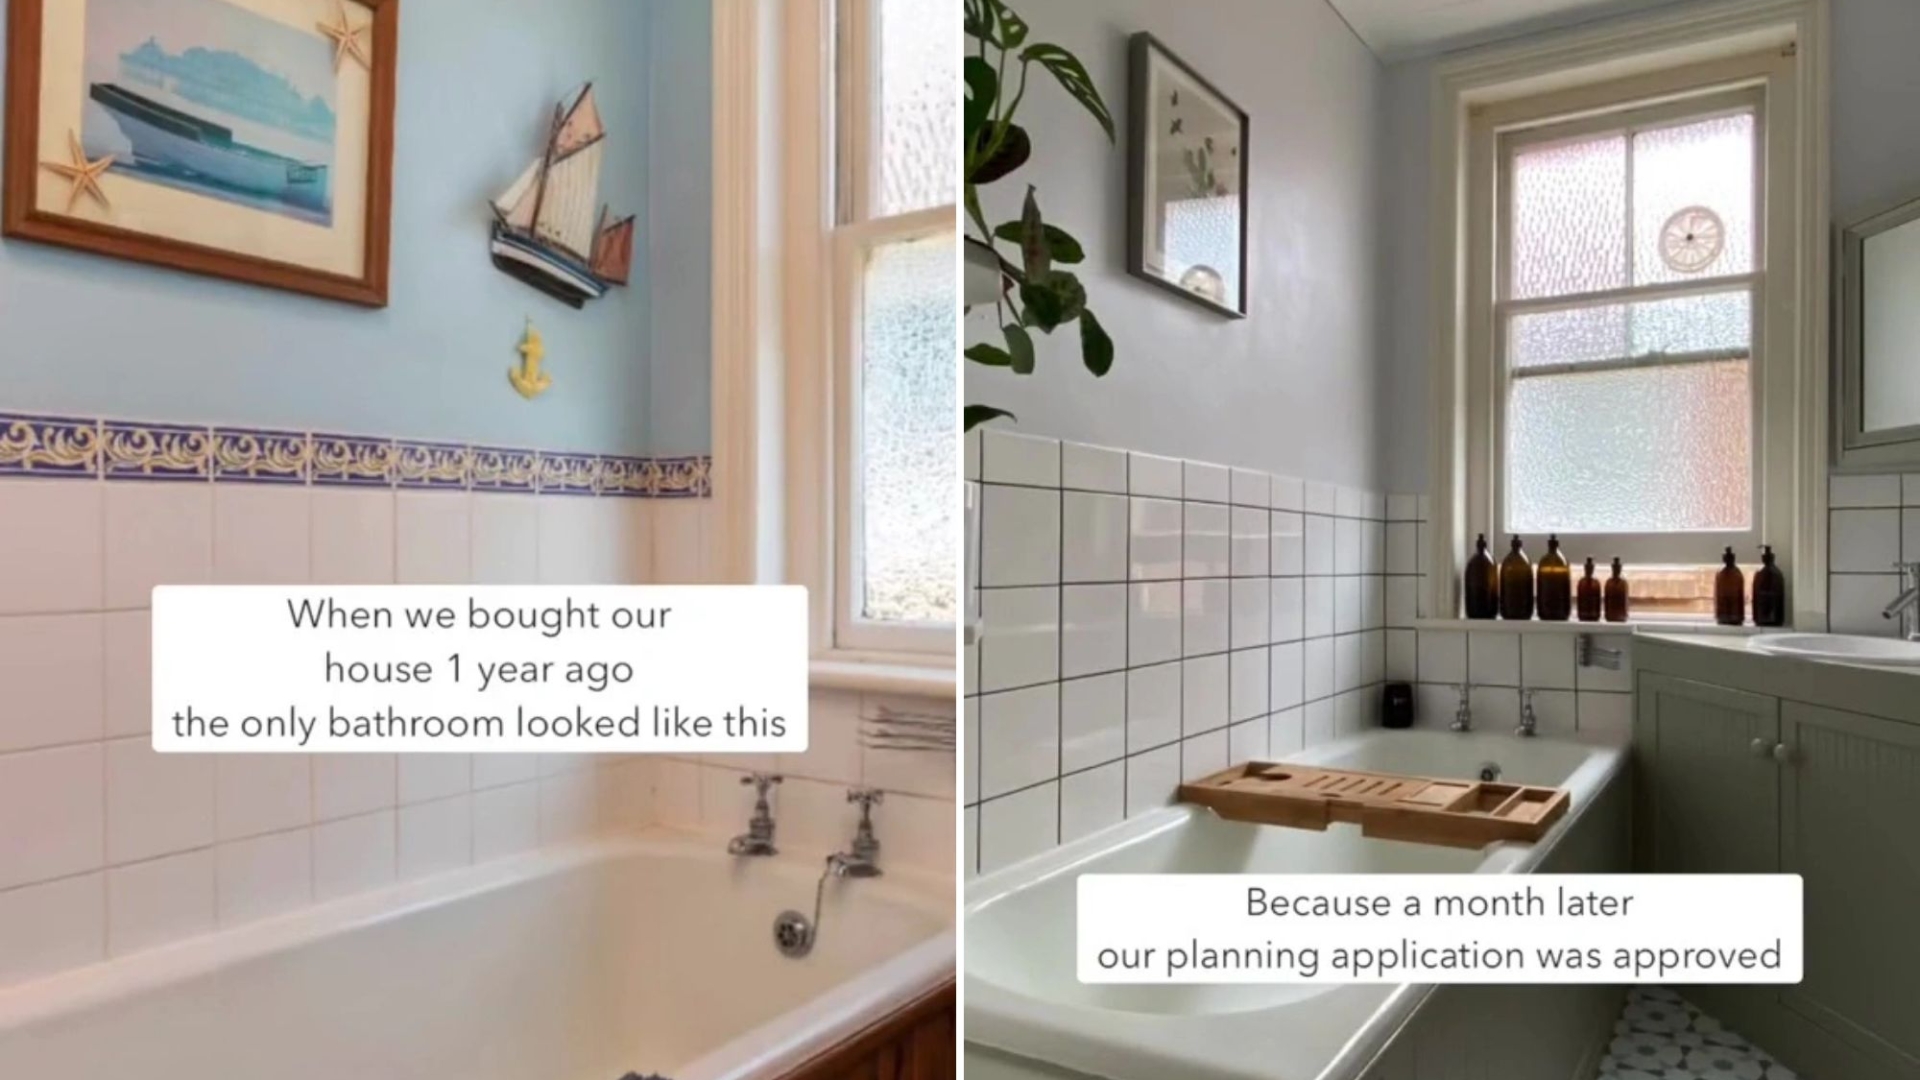 I transformed my bathroom for just £80 – and the results will astound you